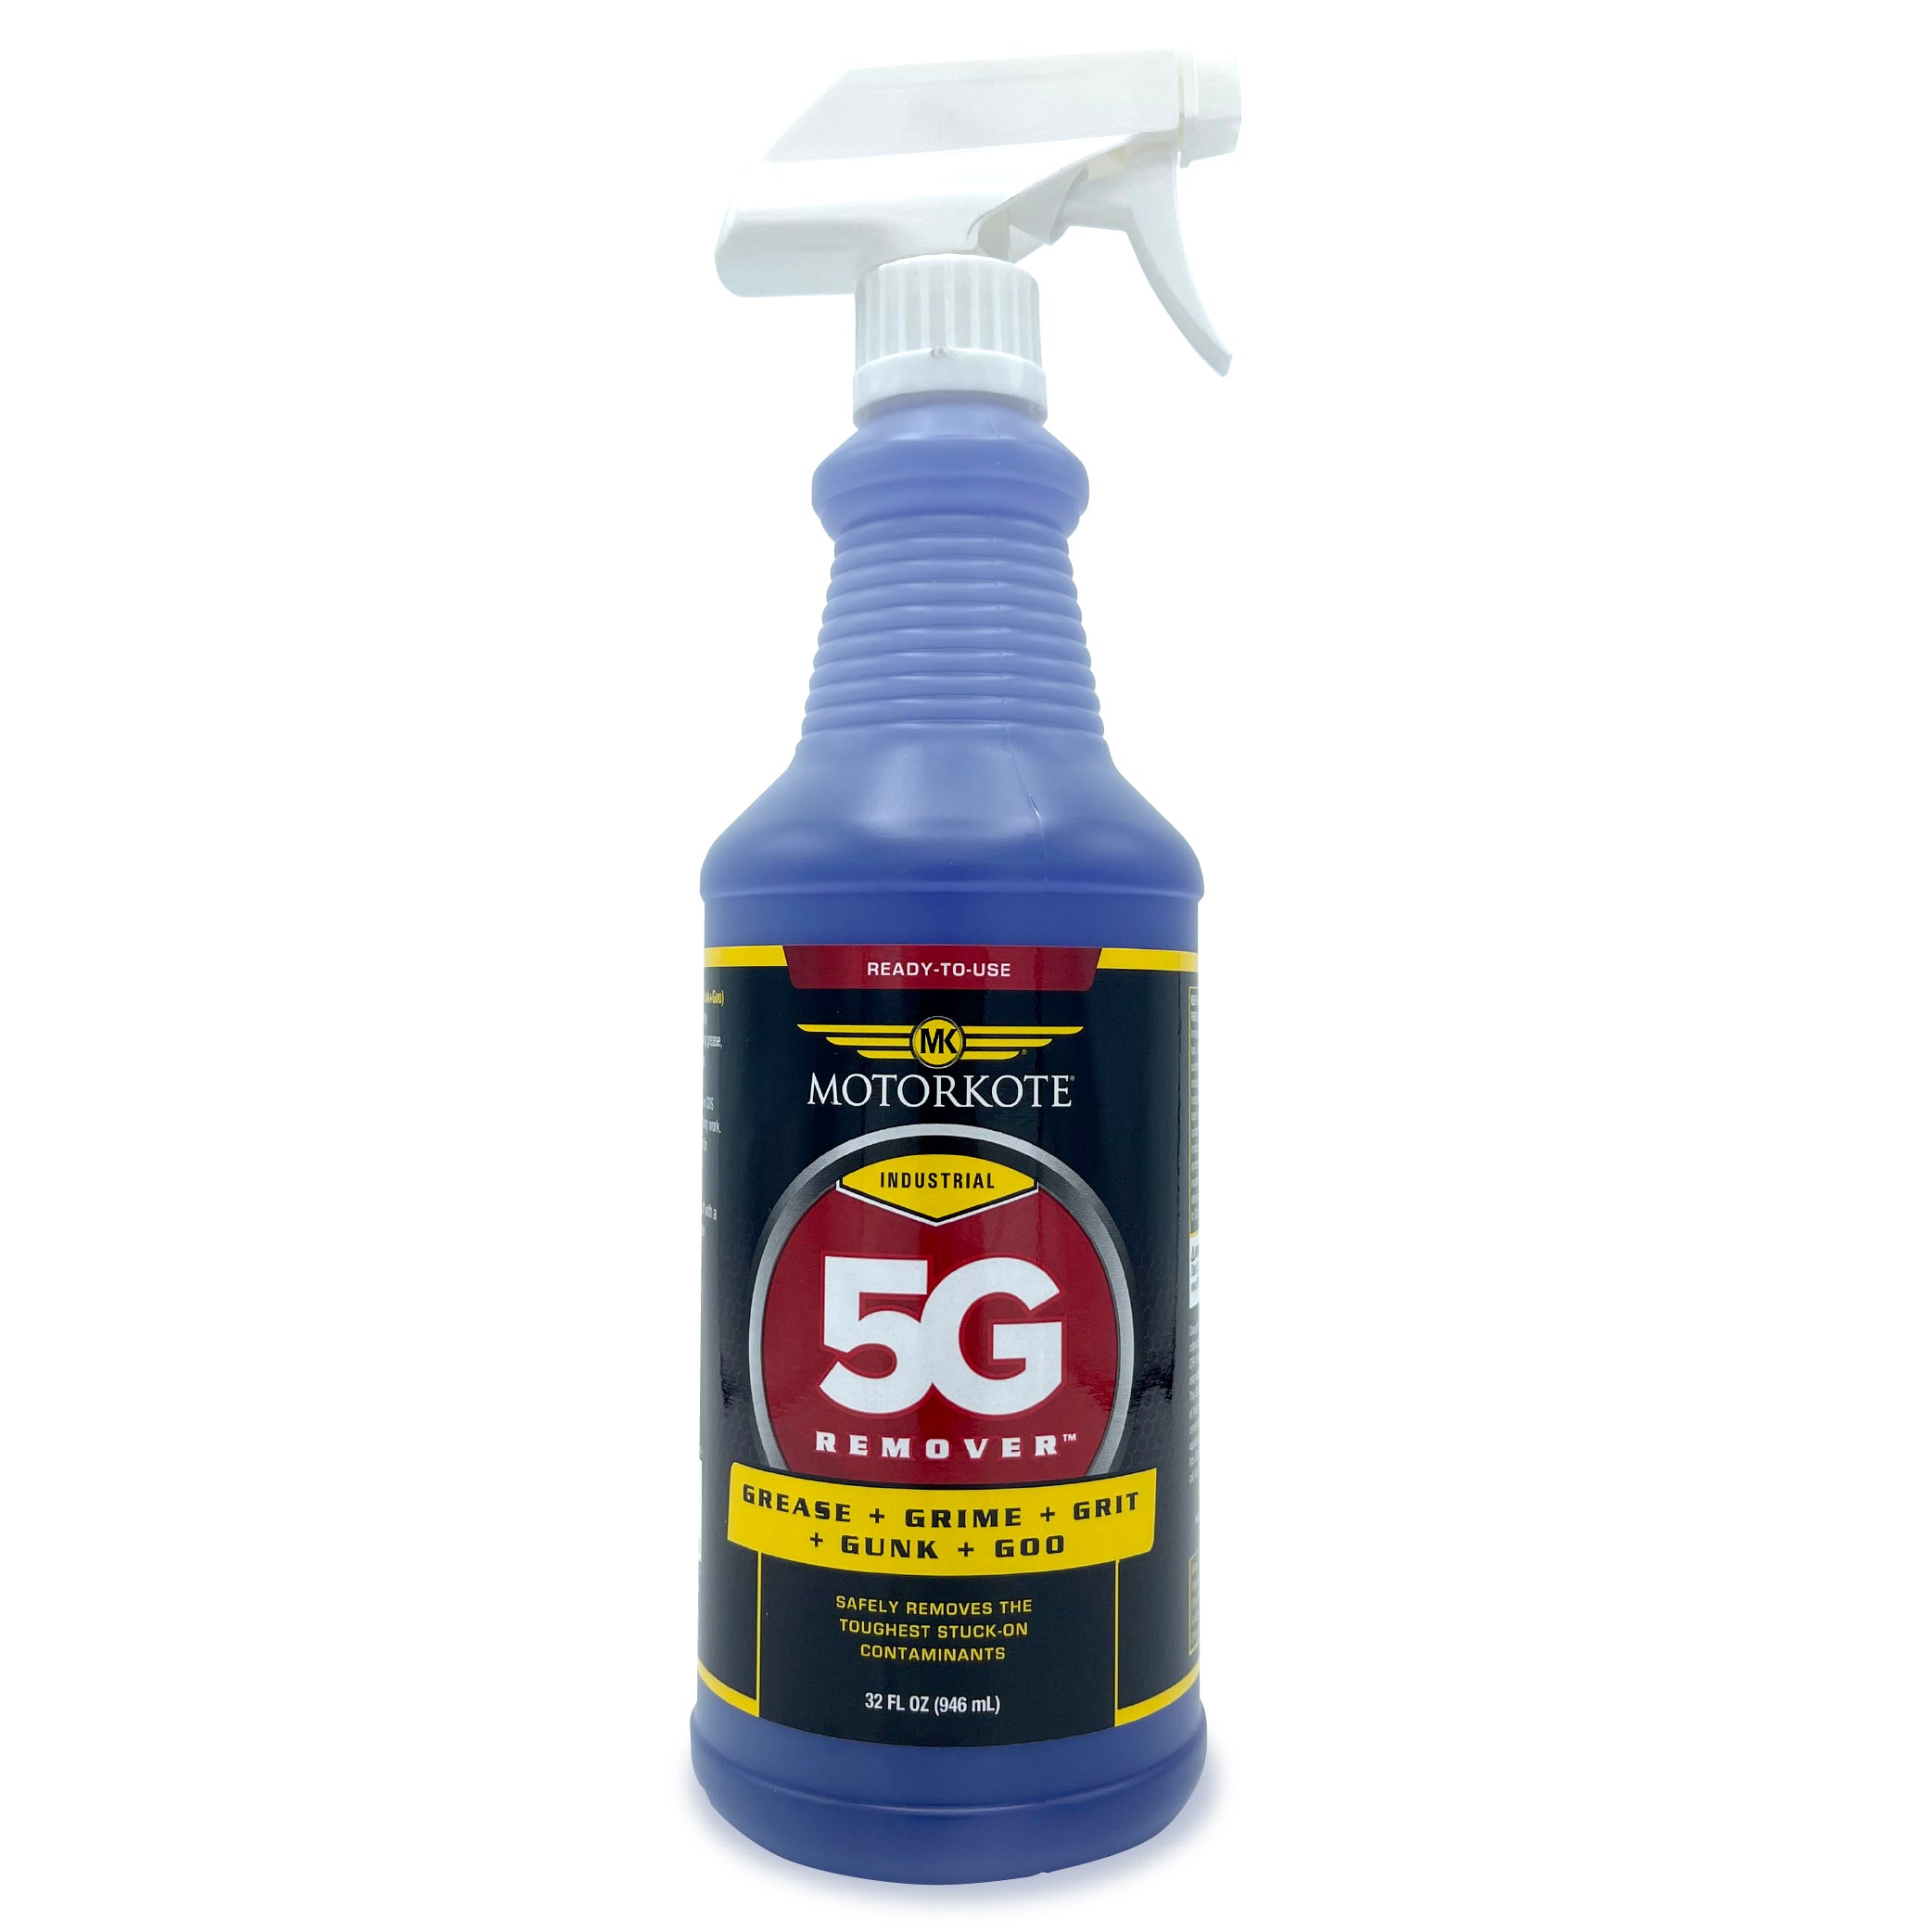 MotorKote 5G Remover Grease,Grime,Grit,Gunk,Goo Industrial-Strength Cl –